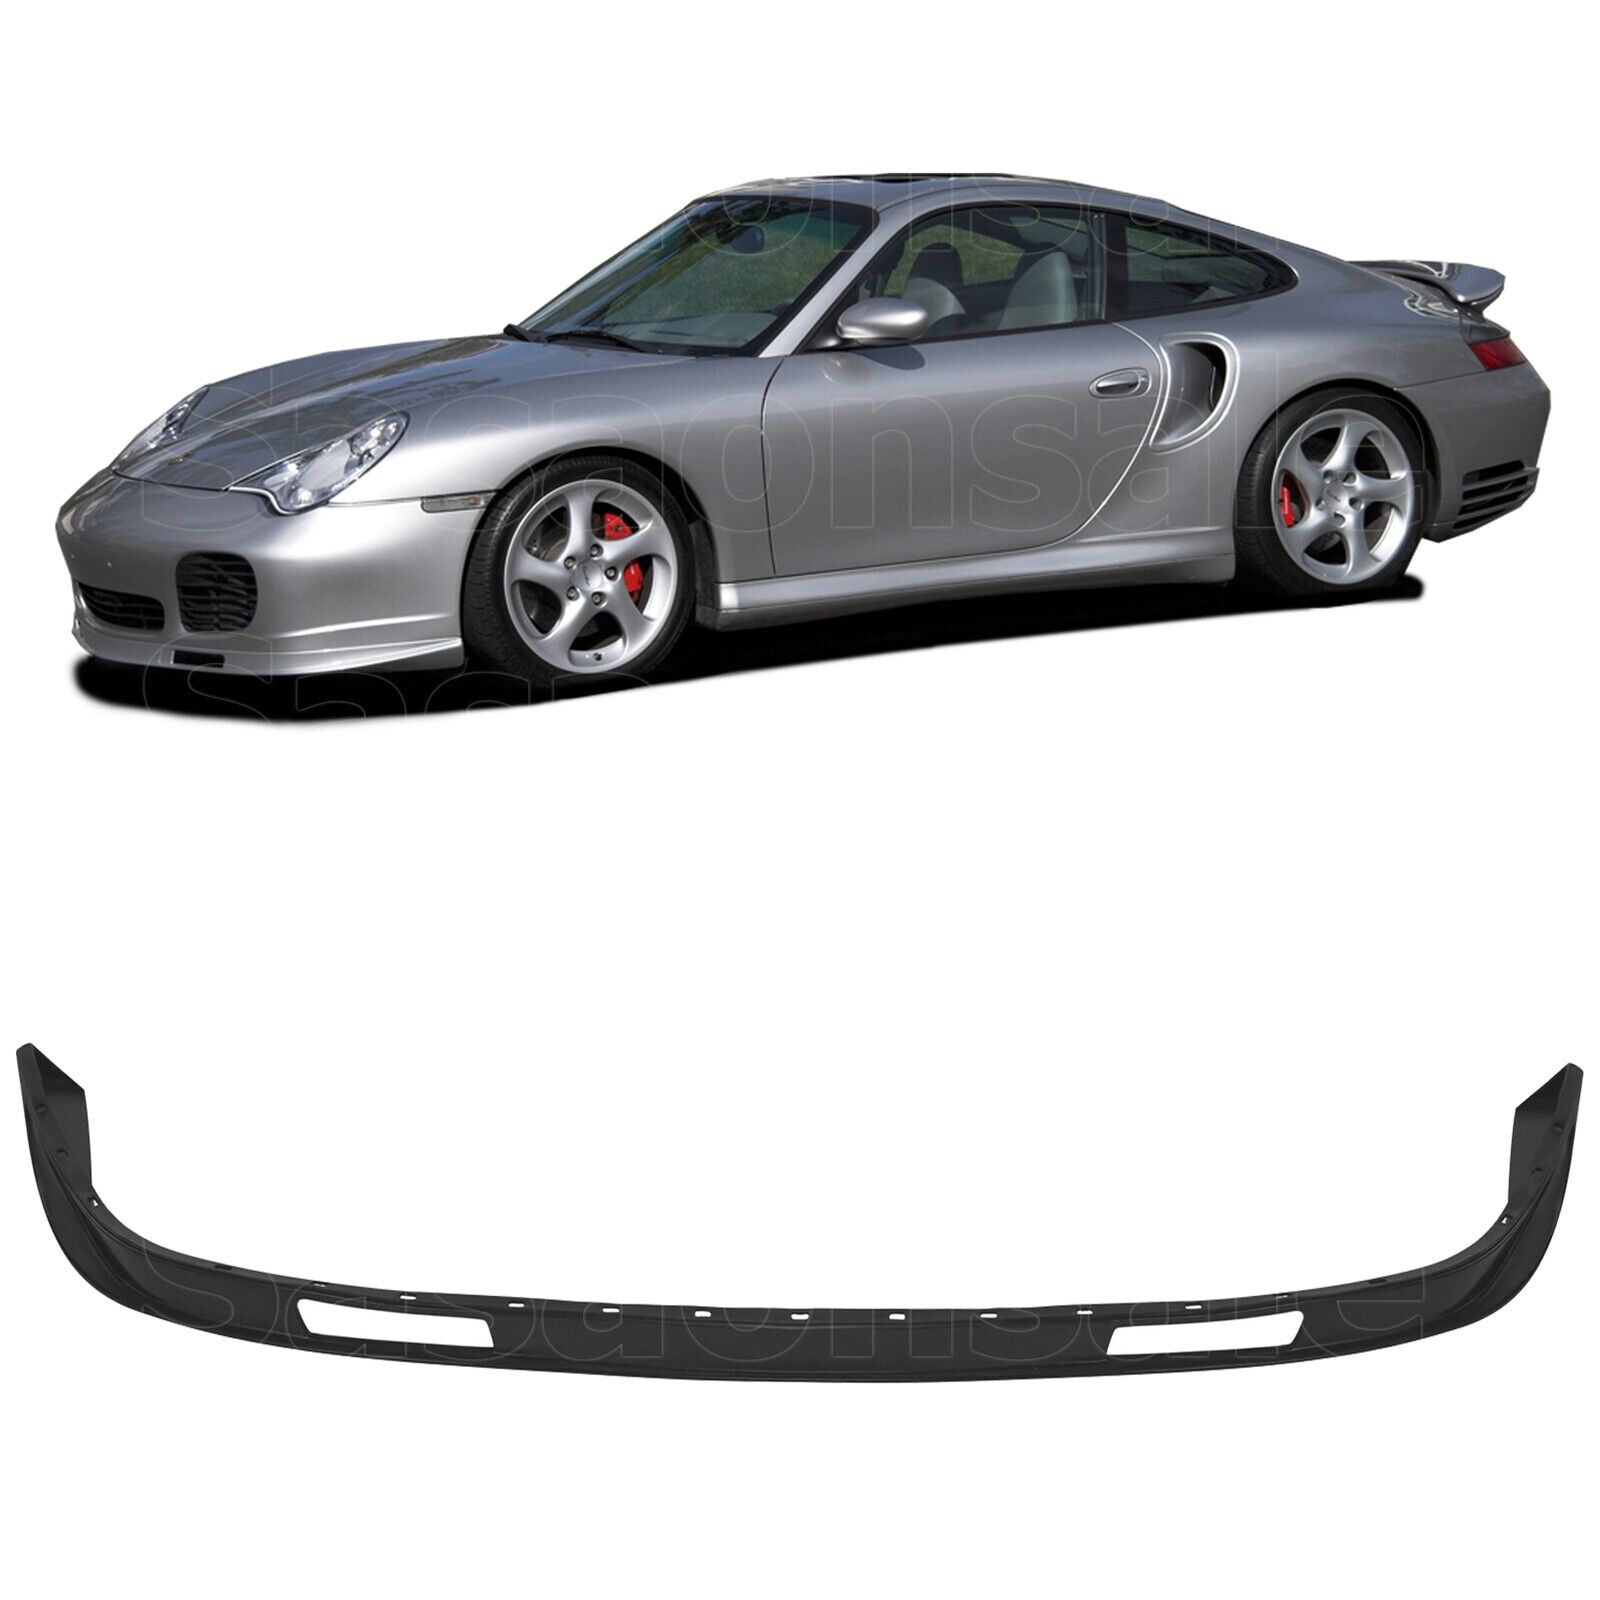 [SASA] Made for 01-05 Porsche 911 996 PU Front Lip 4S & Turbo Bumper Only